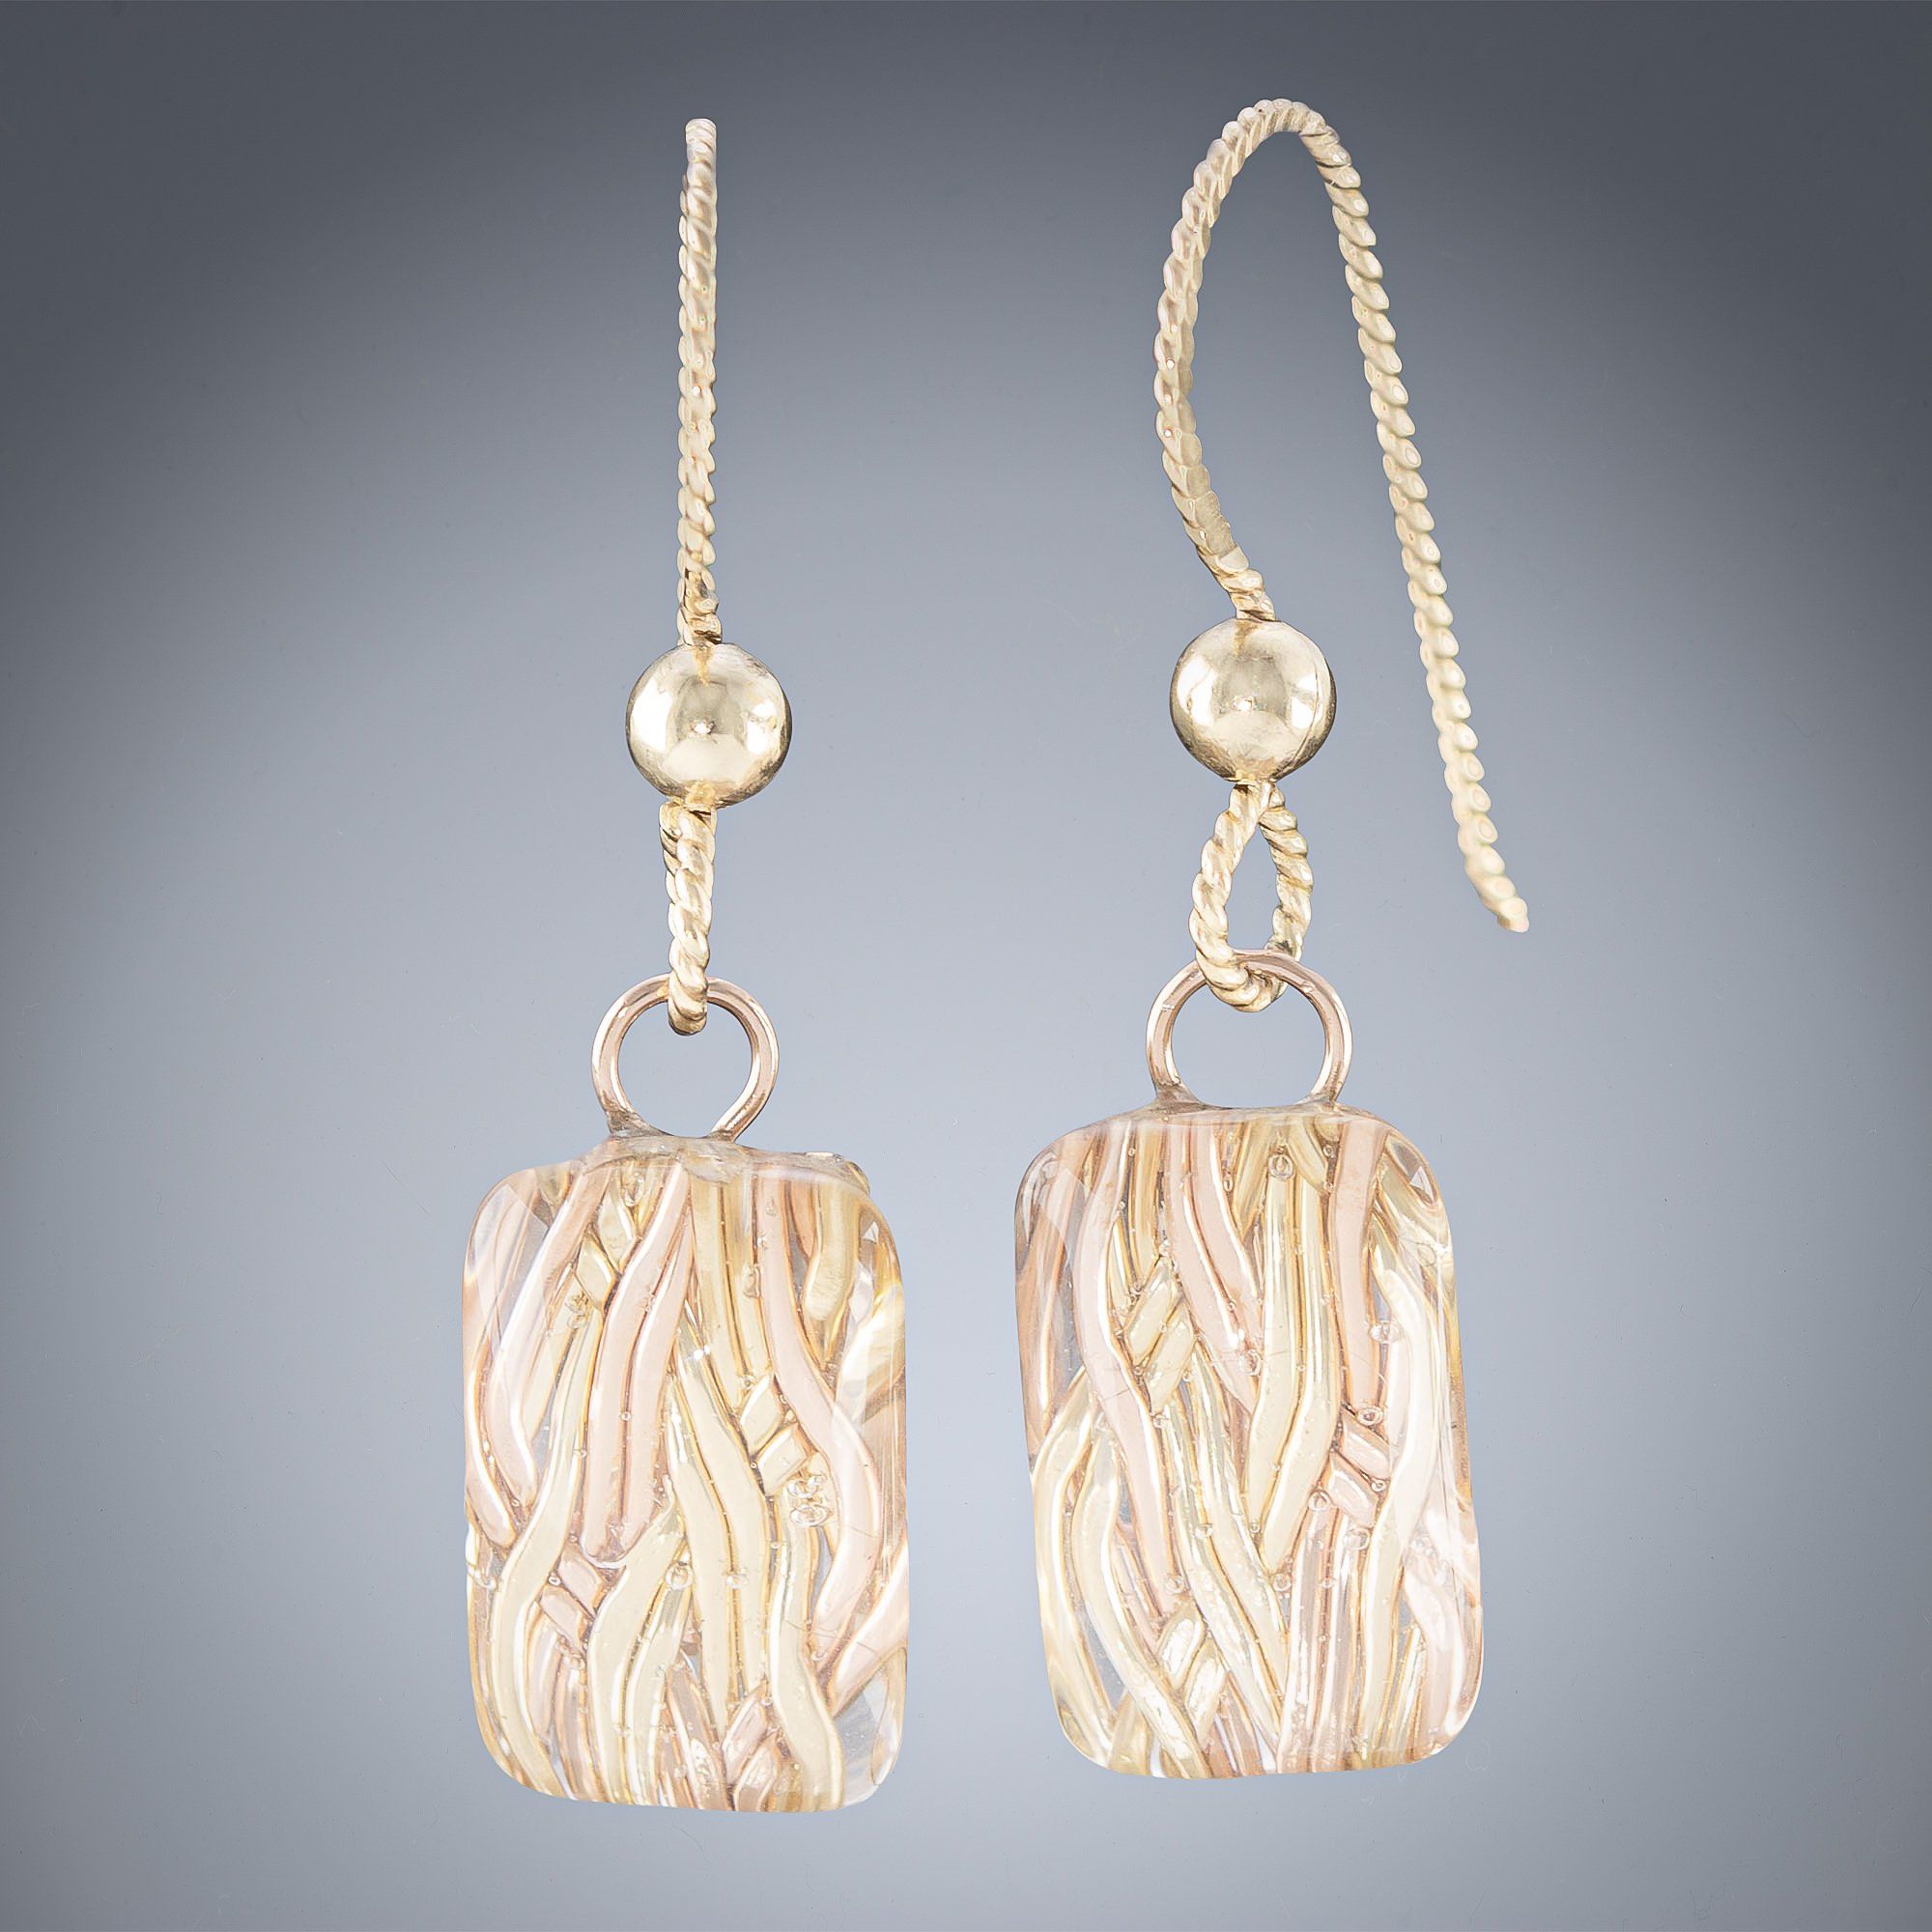 Tiny Sparkly Rectangle Shaped Earrings with Handwoven Metal Fabric and Glass in 14K Yellow and Rose Gold Fill